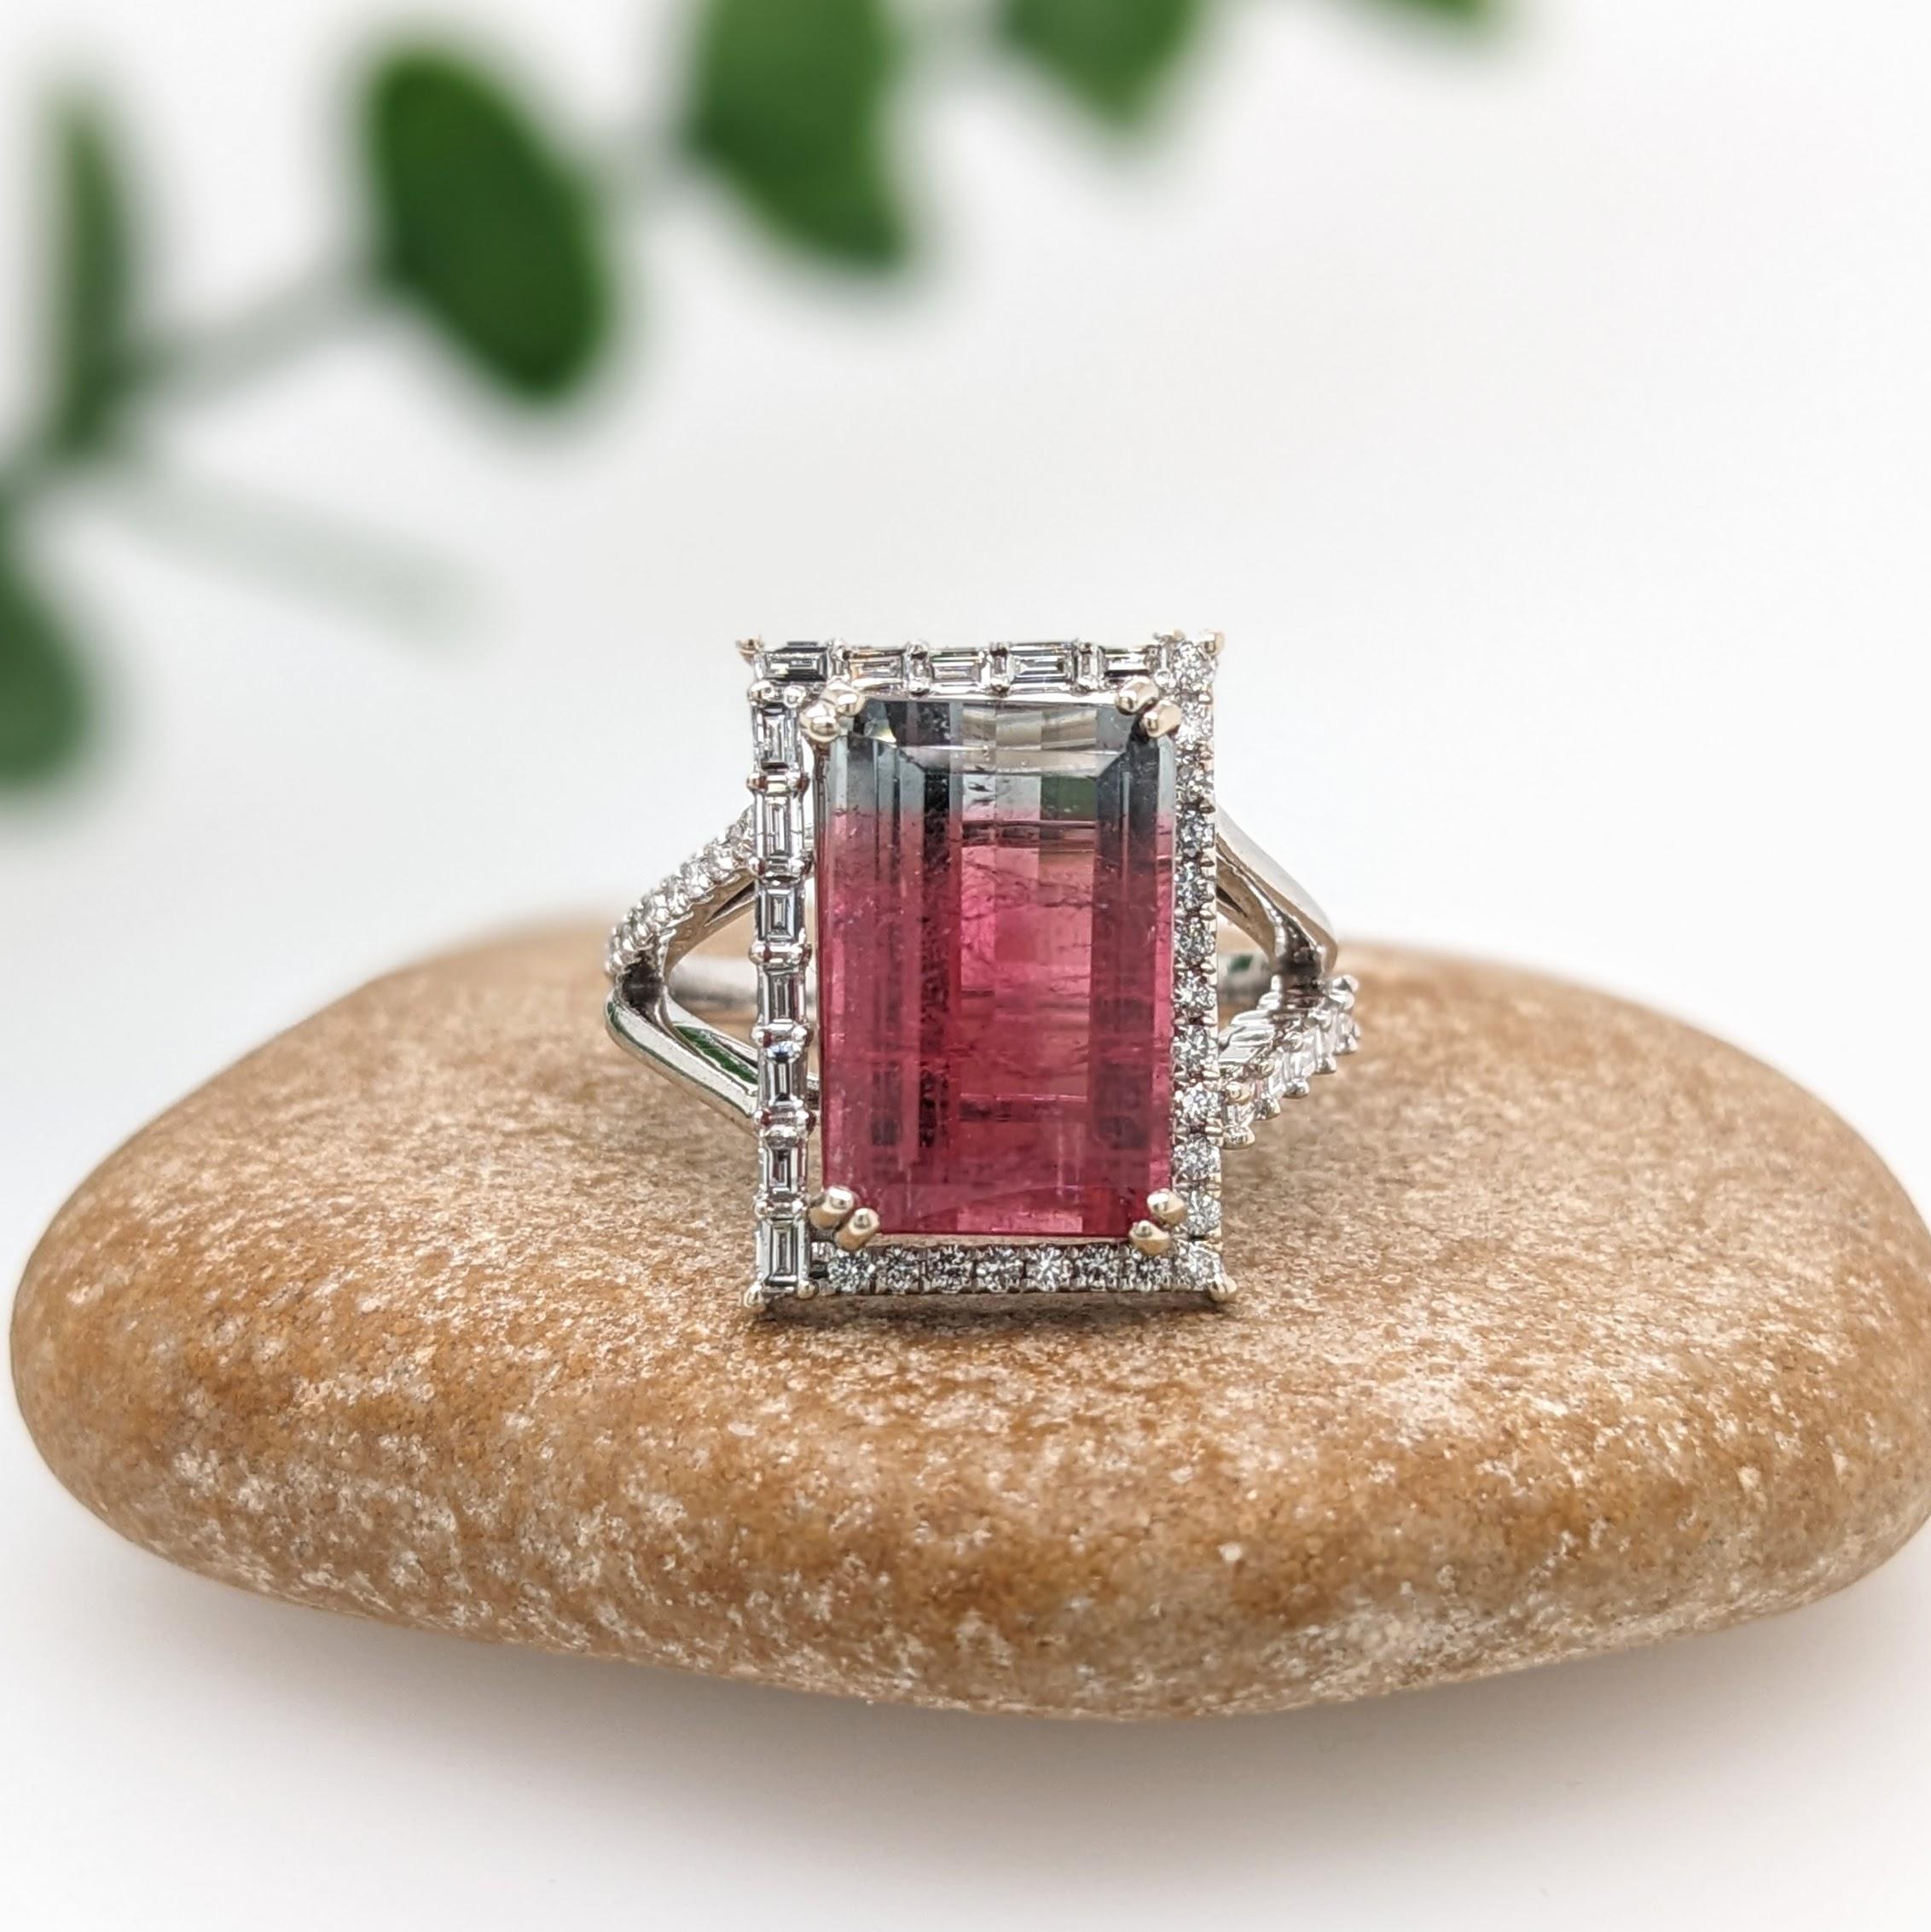 Gorgeous bi color Tourmaline with rich Pink and Gray colors highlighted by a halo of sparkling Diamonds. This ring makes a great statement piece, perfect for the holidays coming up!

Specifications:

Item Type: Ring
Center Stone: